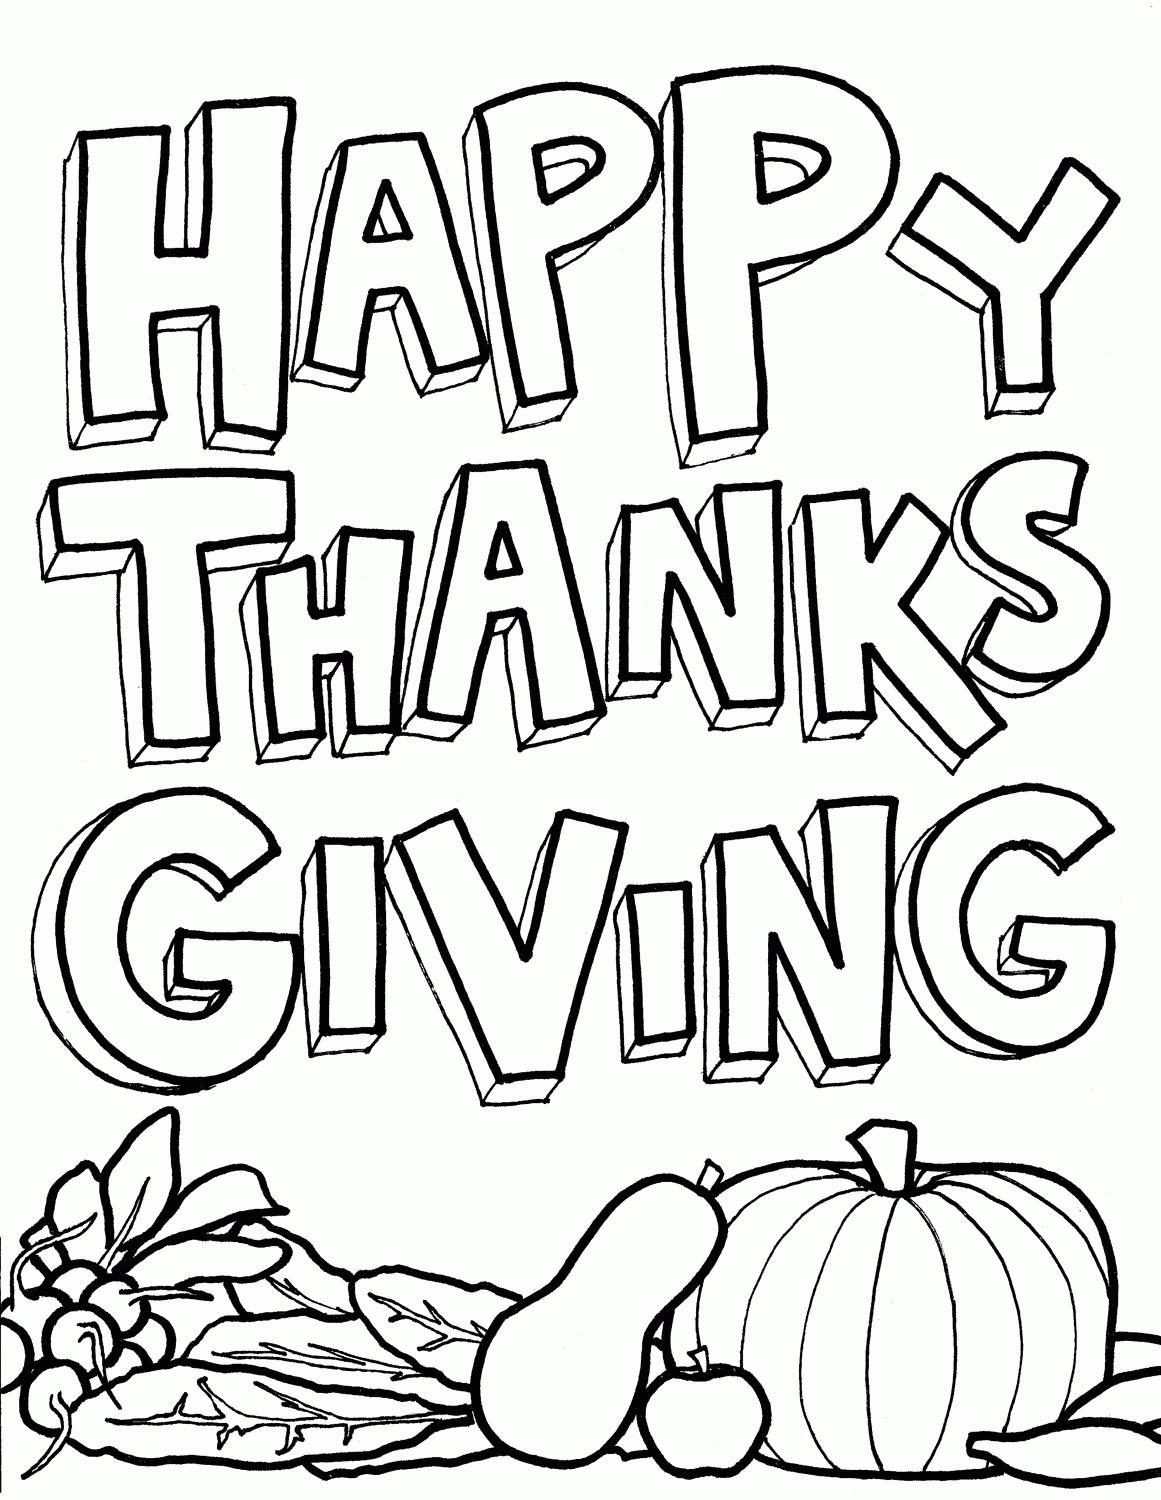 Coloring Page Thanksgiving - Coloring Page